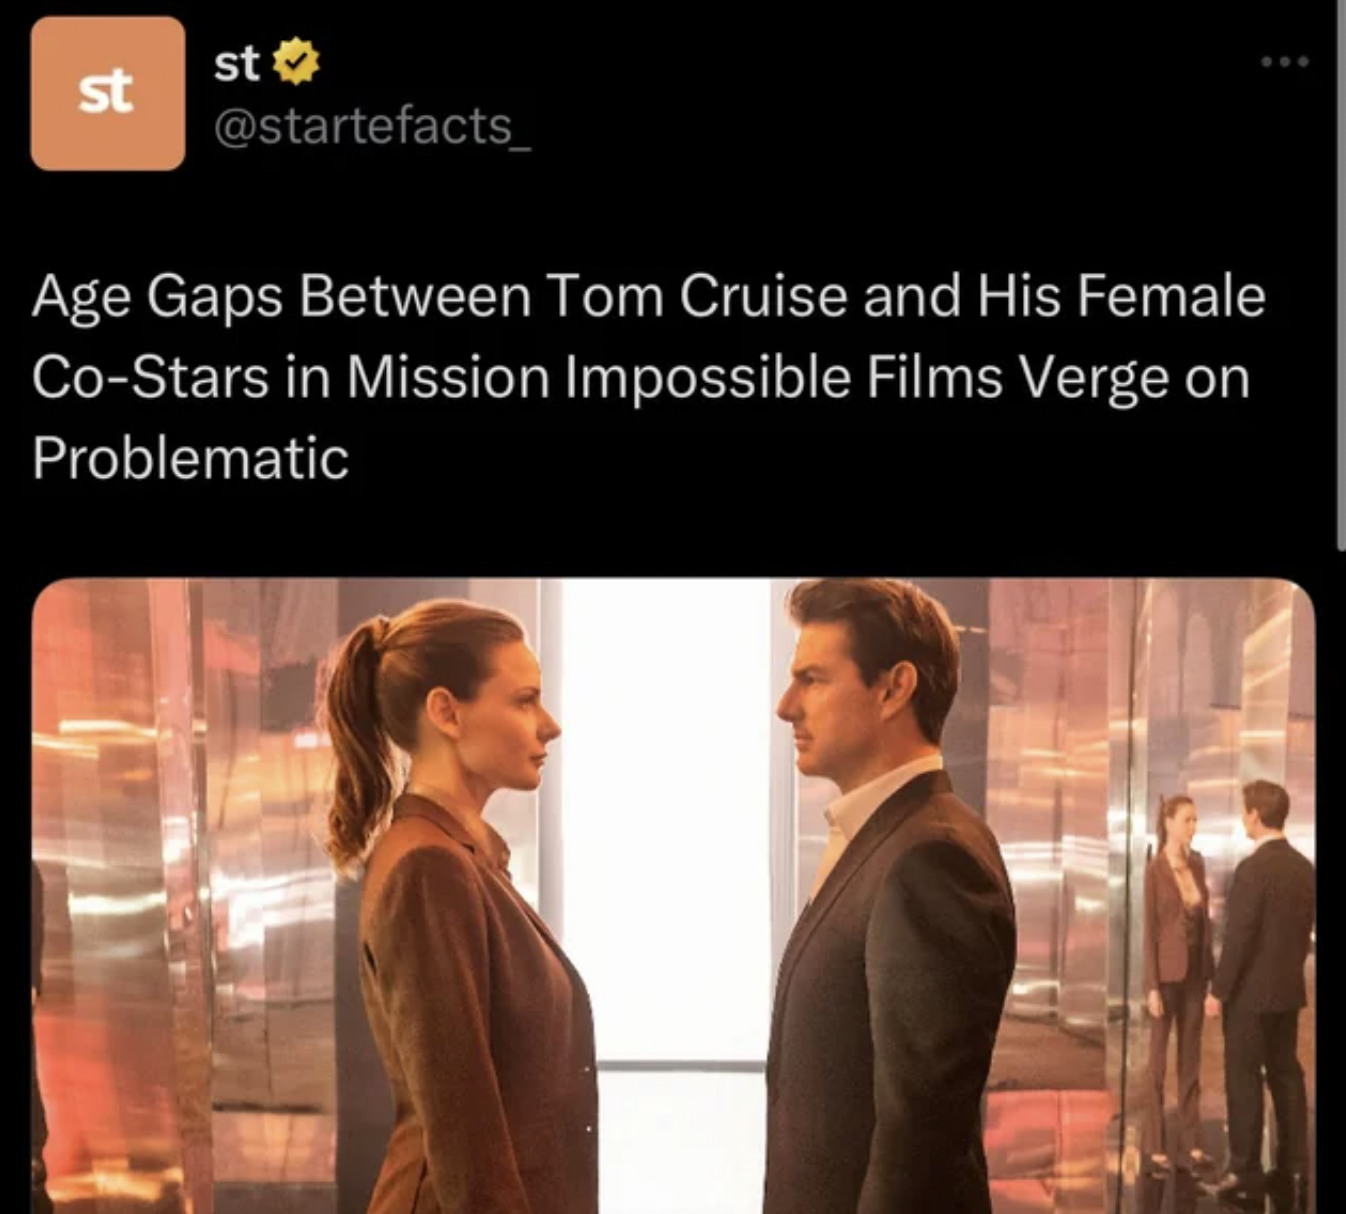 mission impossible 6 - st st Age Gaps Between Tom Cruise and His Female CoStars in Mission Impossible Films Verge on Problematic